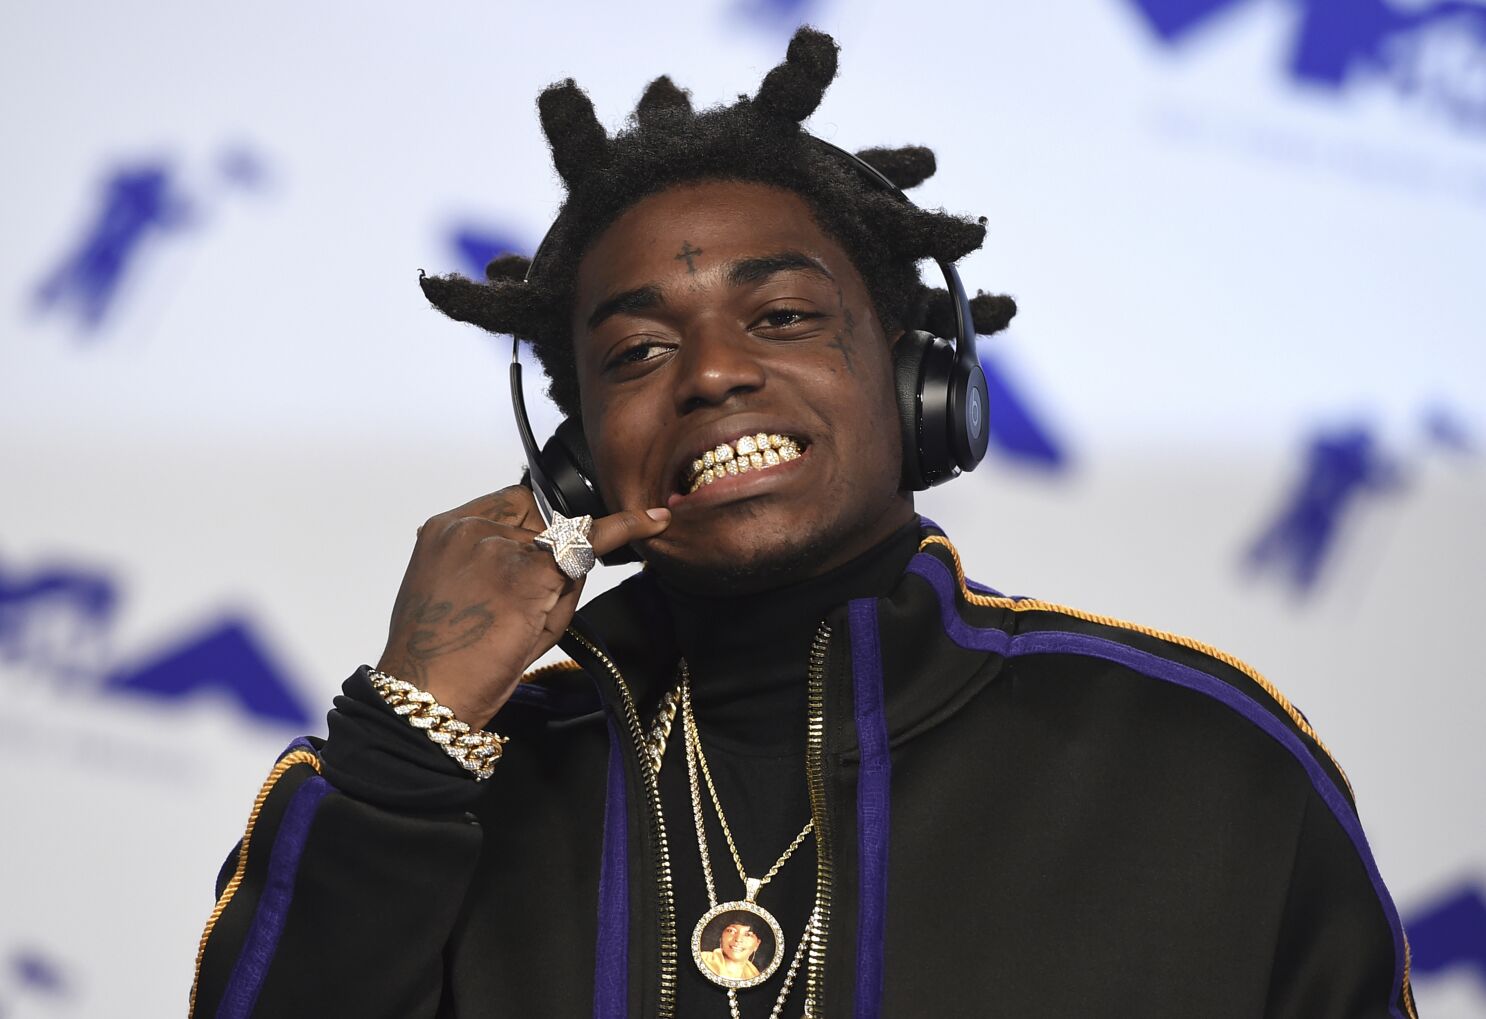 21 Facts About The Controversial Rapper, Kodak Black